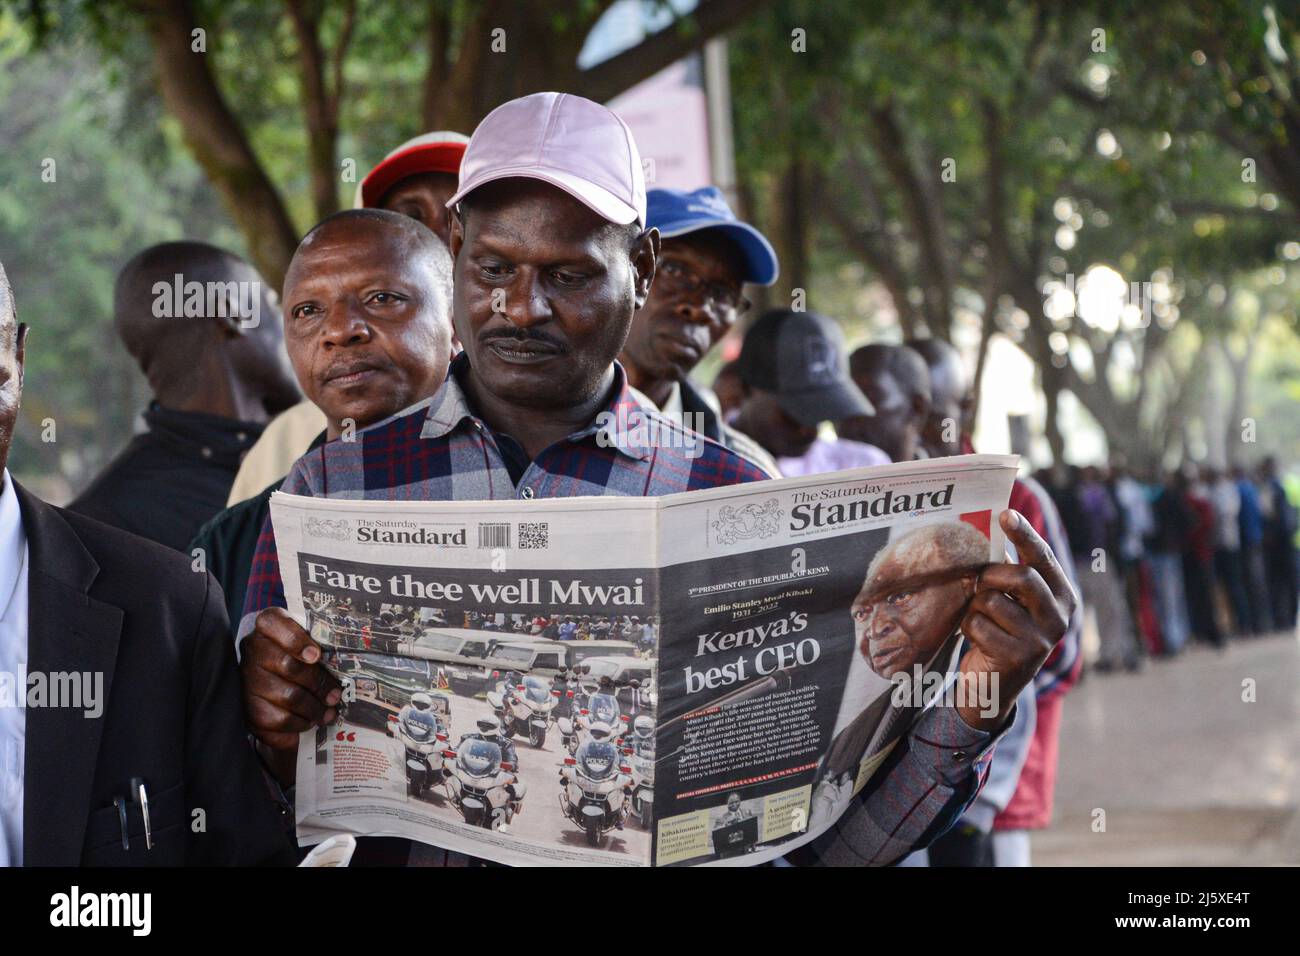 Nairobi, Kenya. 25th Apr, 2022. A member of the public reads a newspaper reporting on the death of the former president of Kenya Mwai Kibaki as he queues to see his body which is lying in state for the second day at the Parliament Building. The former head of state, who ruled for eight years (December 2002 until April 2013) died on April 22, 2022, as announced by the current president Uhuru Kenyatta. Credit: SOPA Images Limited/Alamy Live News Stock Photo